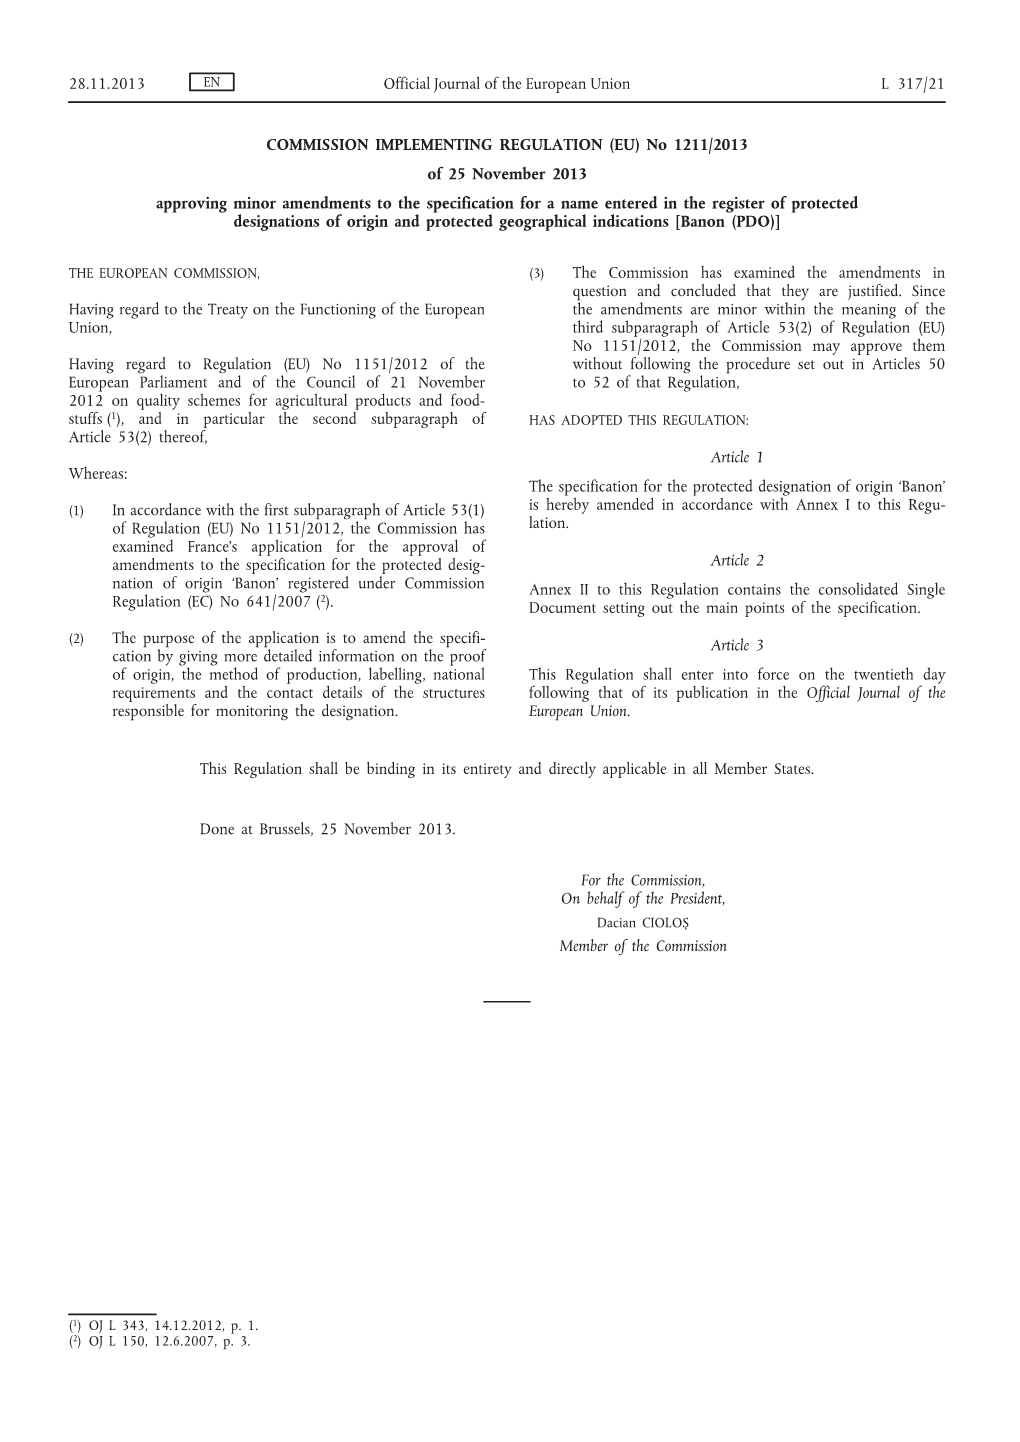 Commission Implementing Regulation (EU) No 1211/2013 of 25